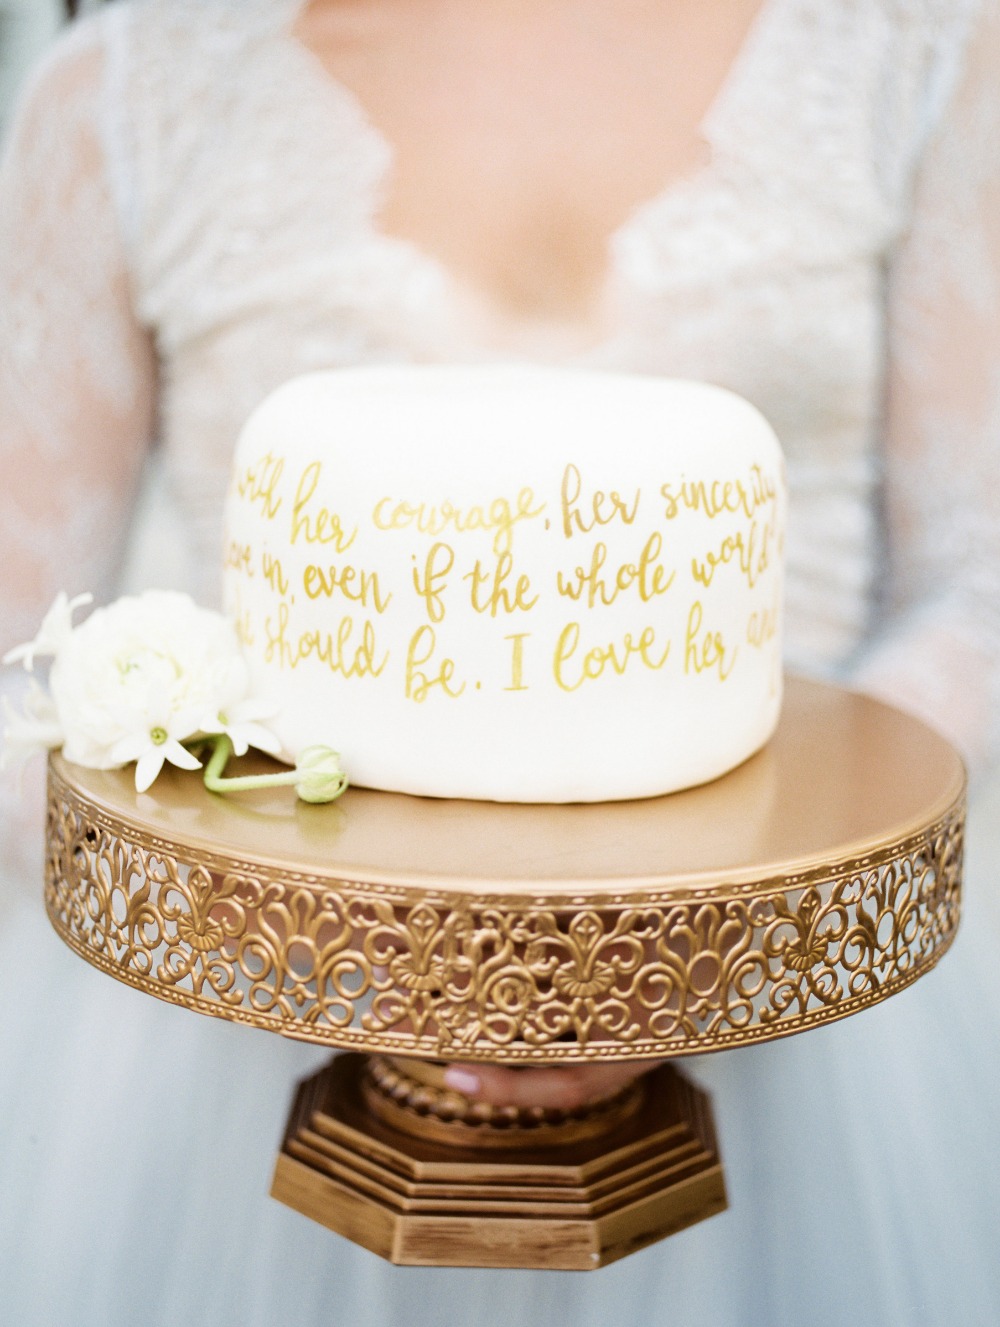 Elopement wedding cake with vows